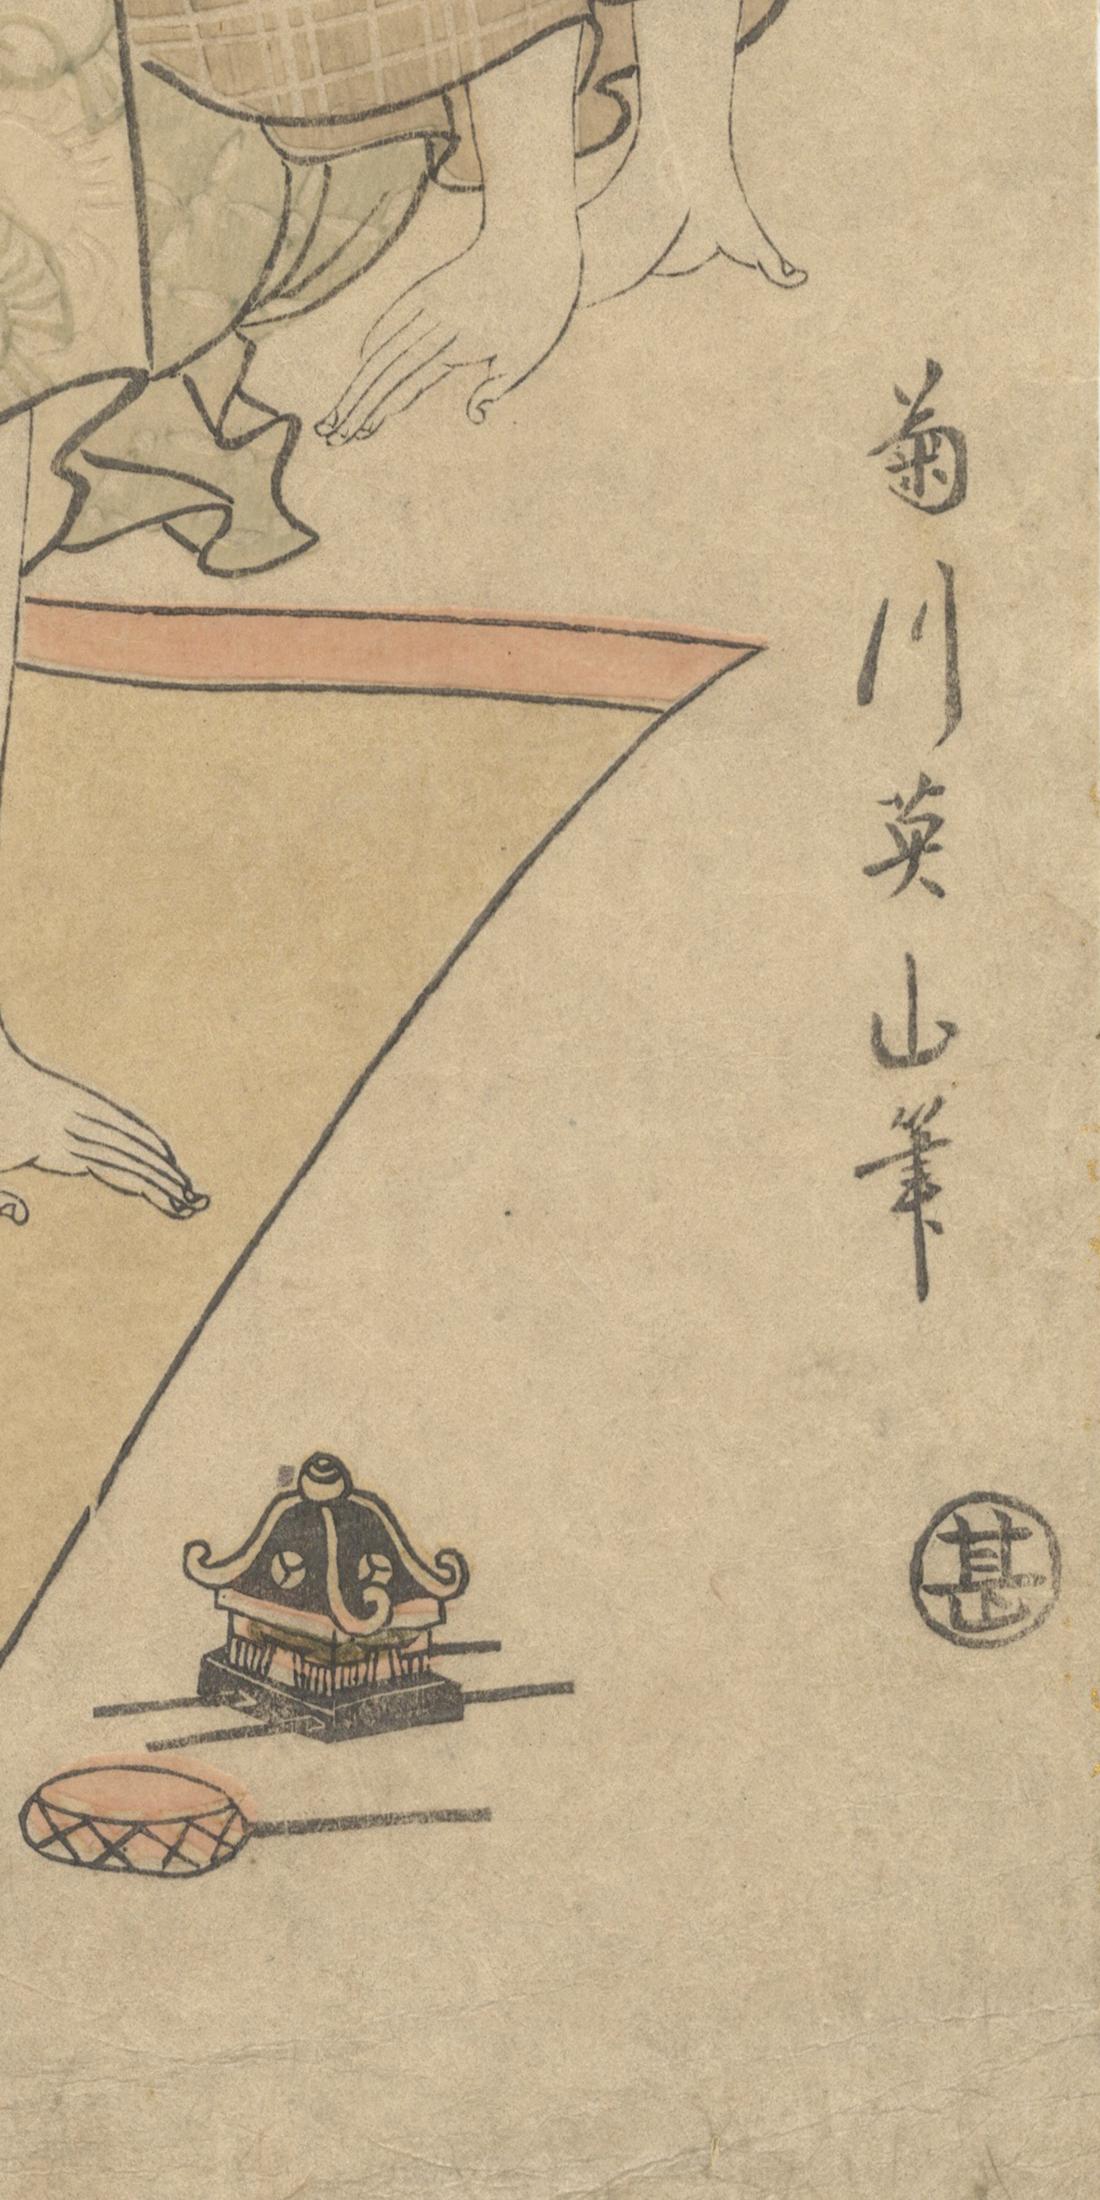 Artists: Eizan Kikugawa (1787-1867)
Title: June, Taking a Nap
Series: Fashionable Twelve Months of Precious Children 
Publisher: Maruya Jinpachi
Date: Late 18th/ Early 19th century
Condition: Centrefold. Minor creases.
Dimensions: 24.6 x 37.8 cm

An